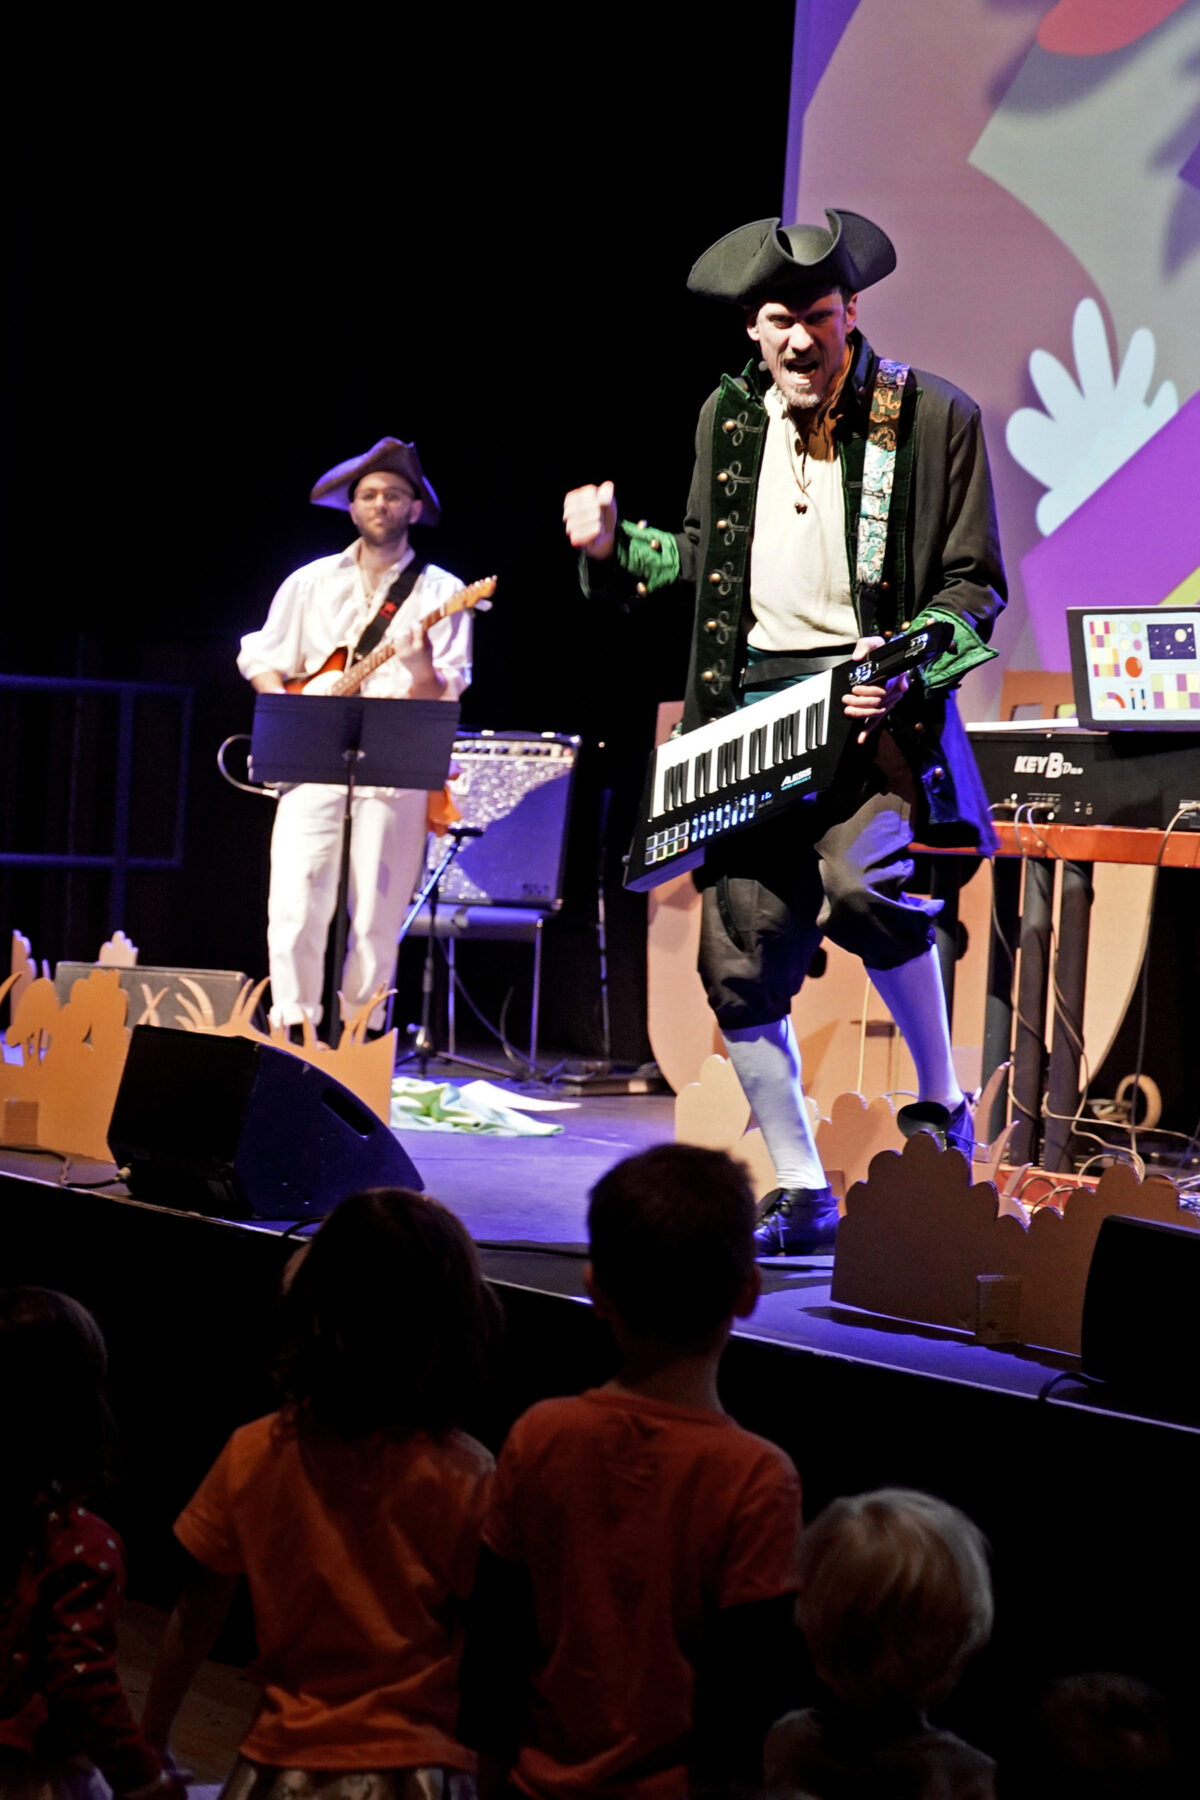 Two musicians dressed up as pirates performing on a stage.